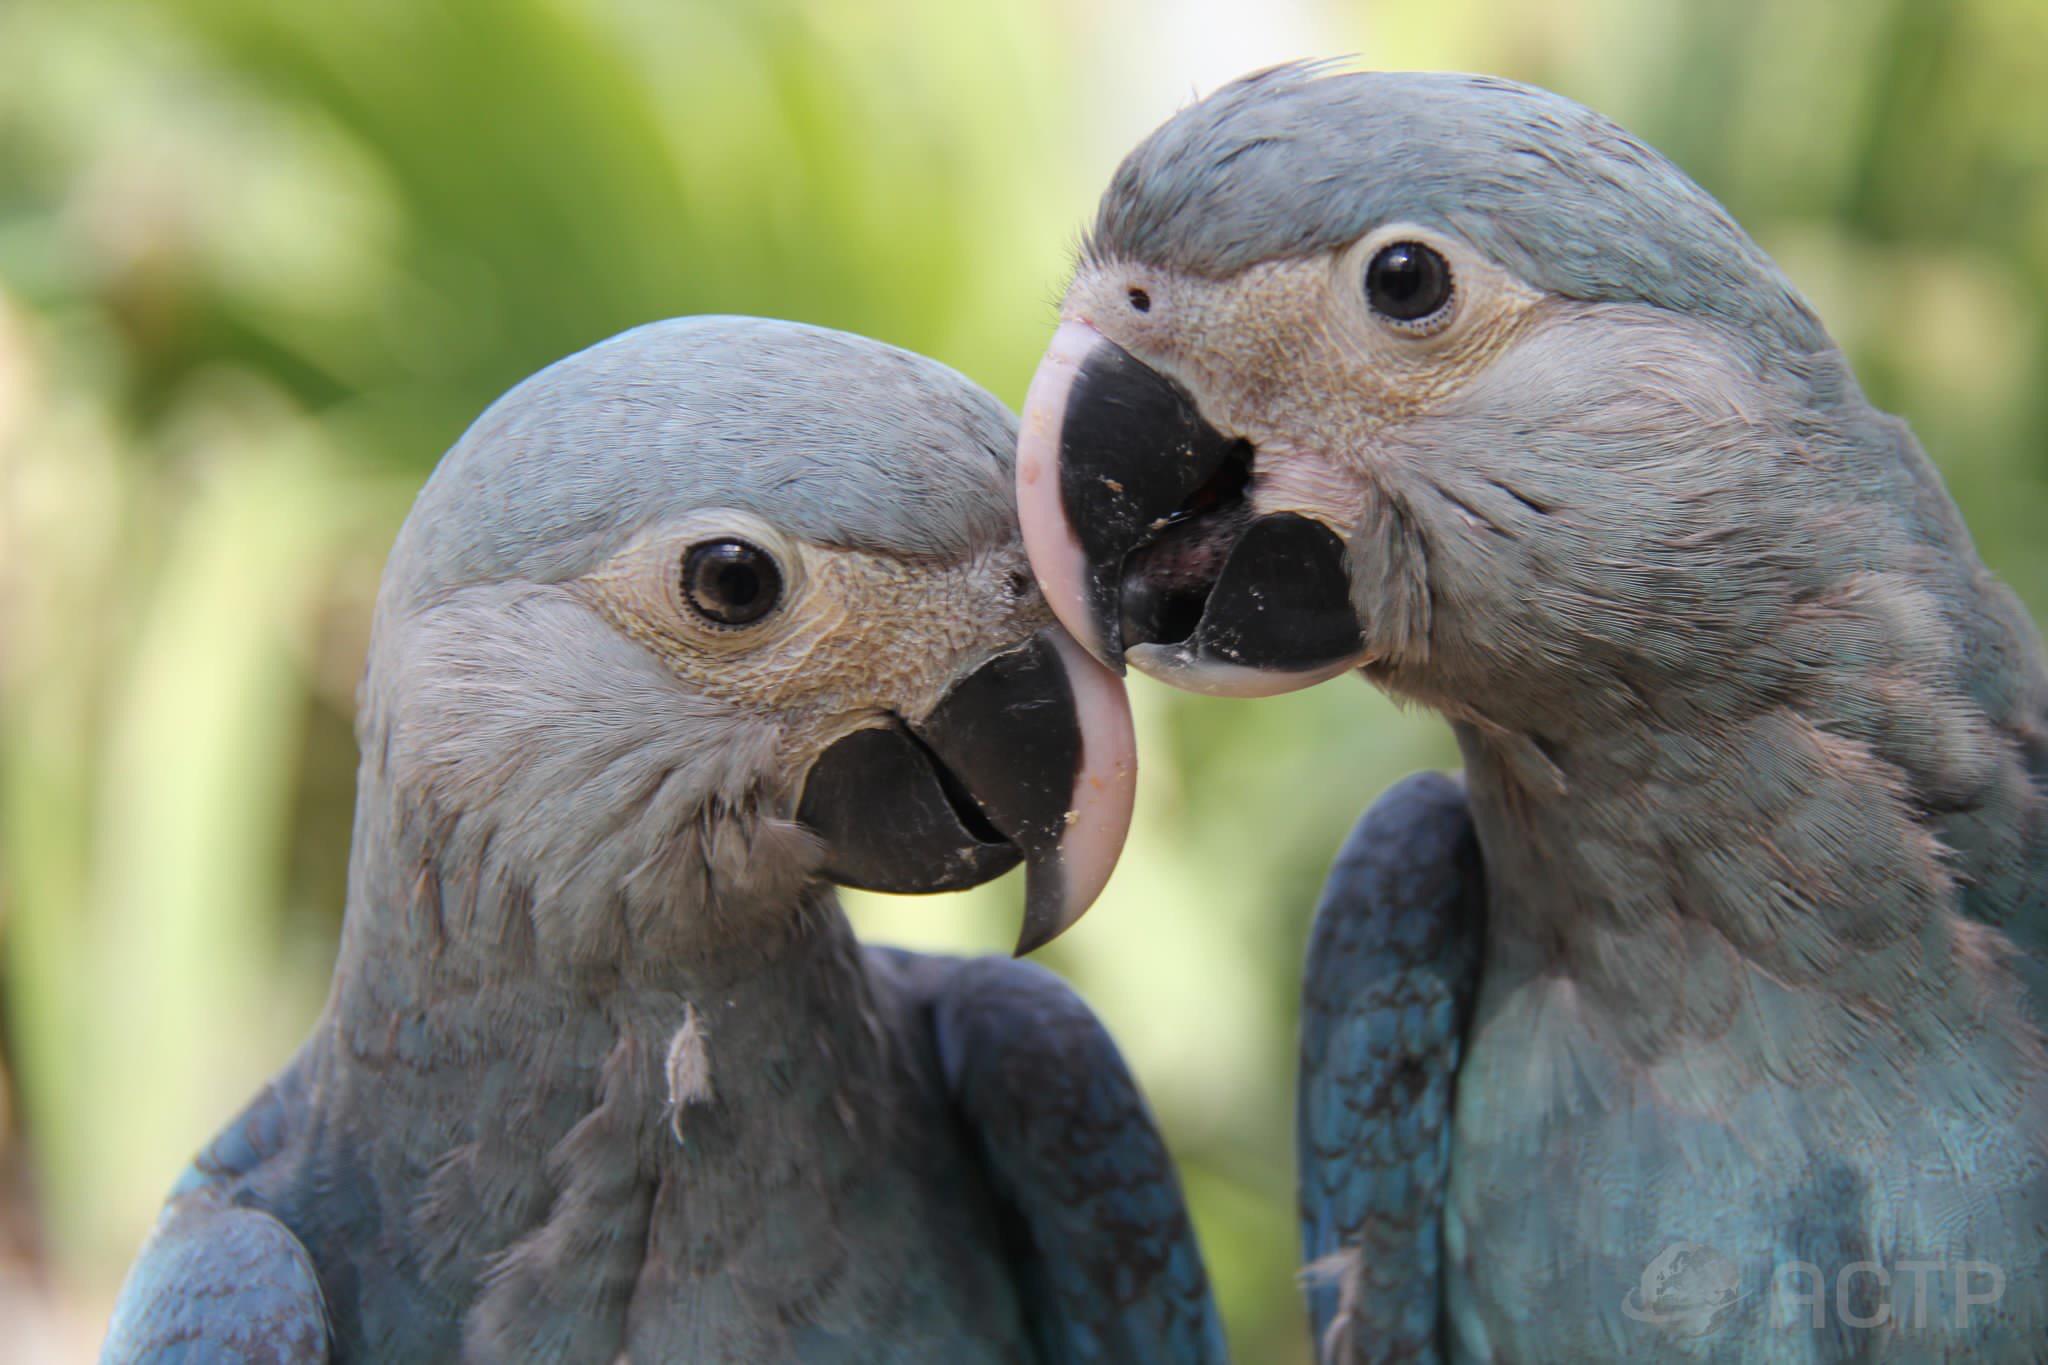 The Blue Macaws are hard to reproduce. Only 10 percent of the eggs hatch, which means that genetically, most couples are incompatible.